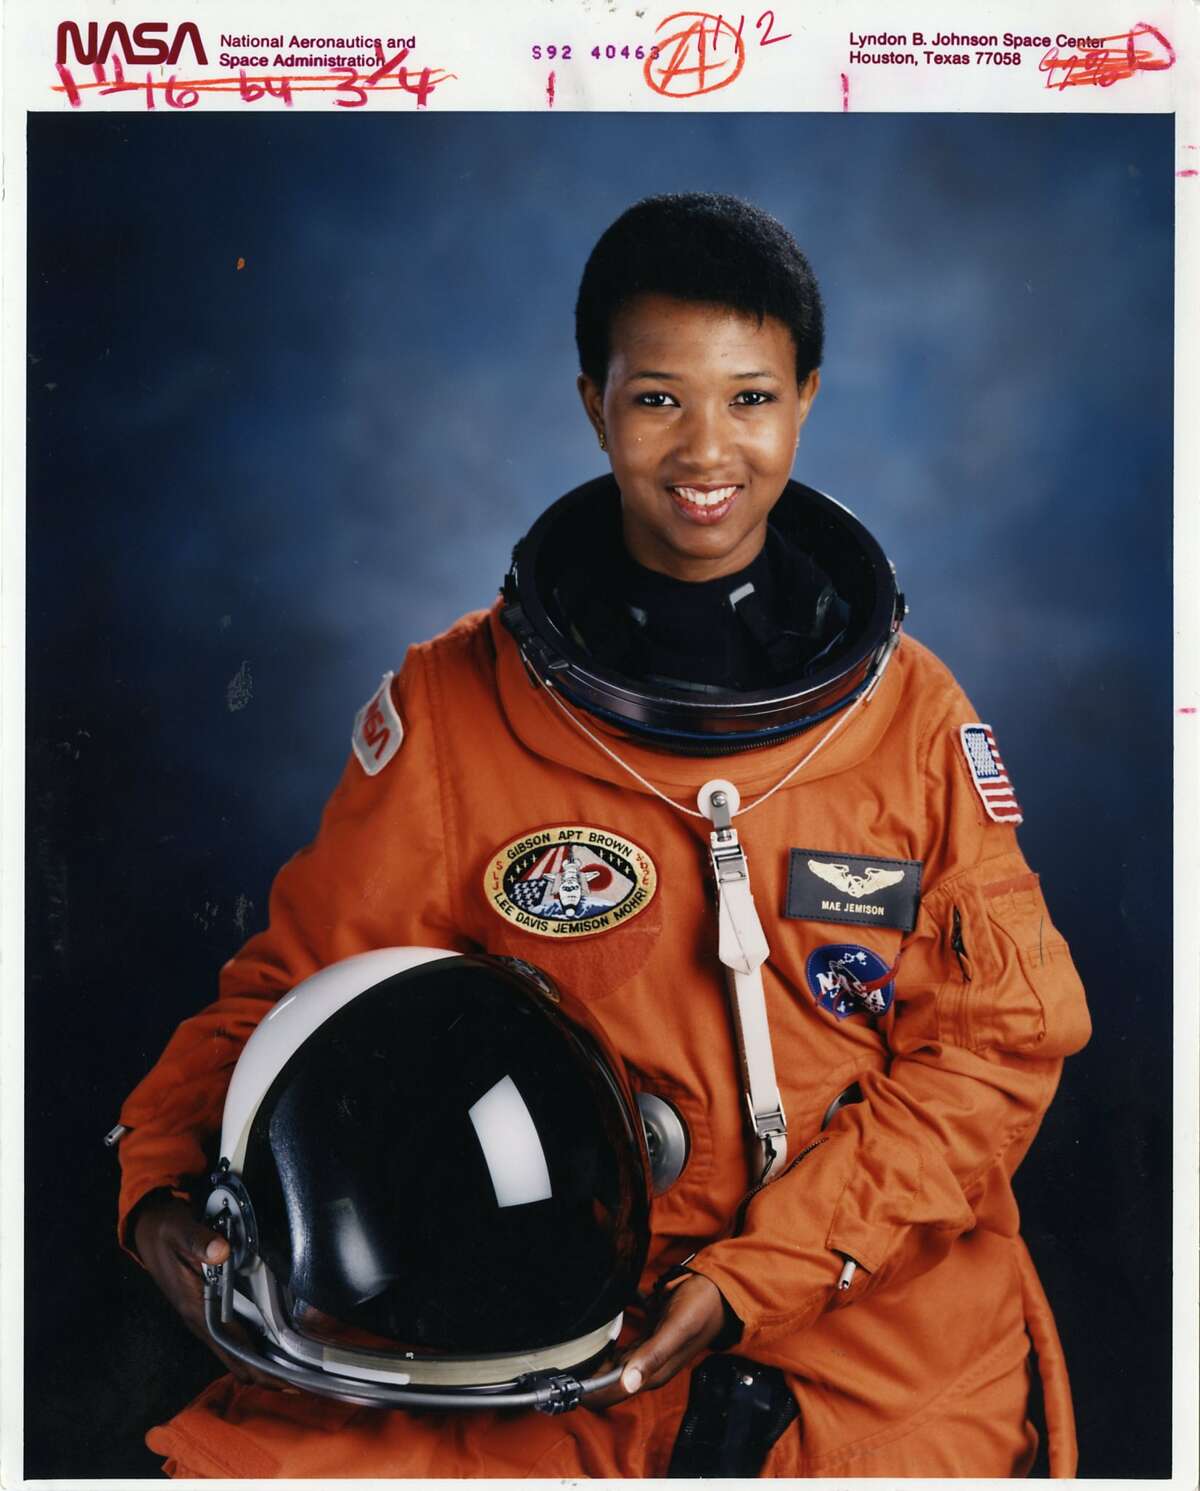 MAE C. JEMISON, M.D. -- Astronaut 1992 - Mission Specialist Mae Jemison, first black female in space. The first African-American woman in space She was named an astronaut candidate in 1987. She flew her first flight as a science mission specialist on STS-47, Spacelab-J, in September 1992 on board Space Shuttle Endeavour. NASA July 1992 S92-40463 Johnson Space Center, Houston, Texas 77058